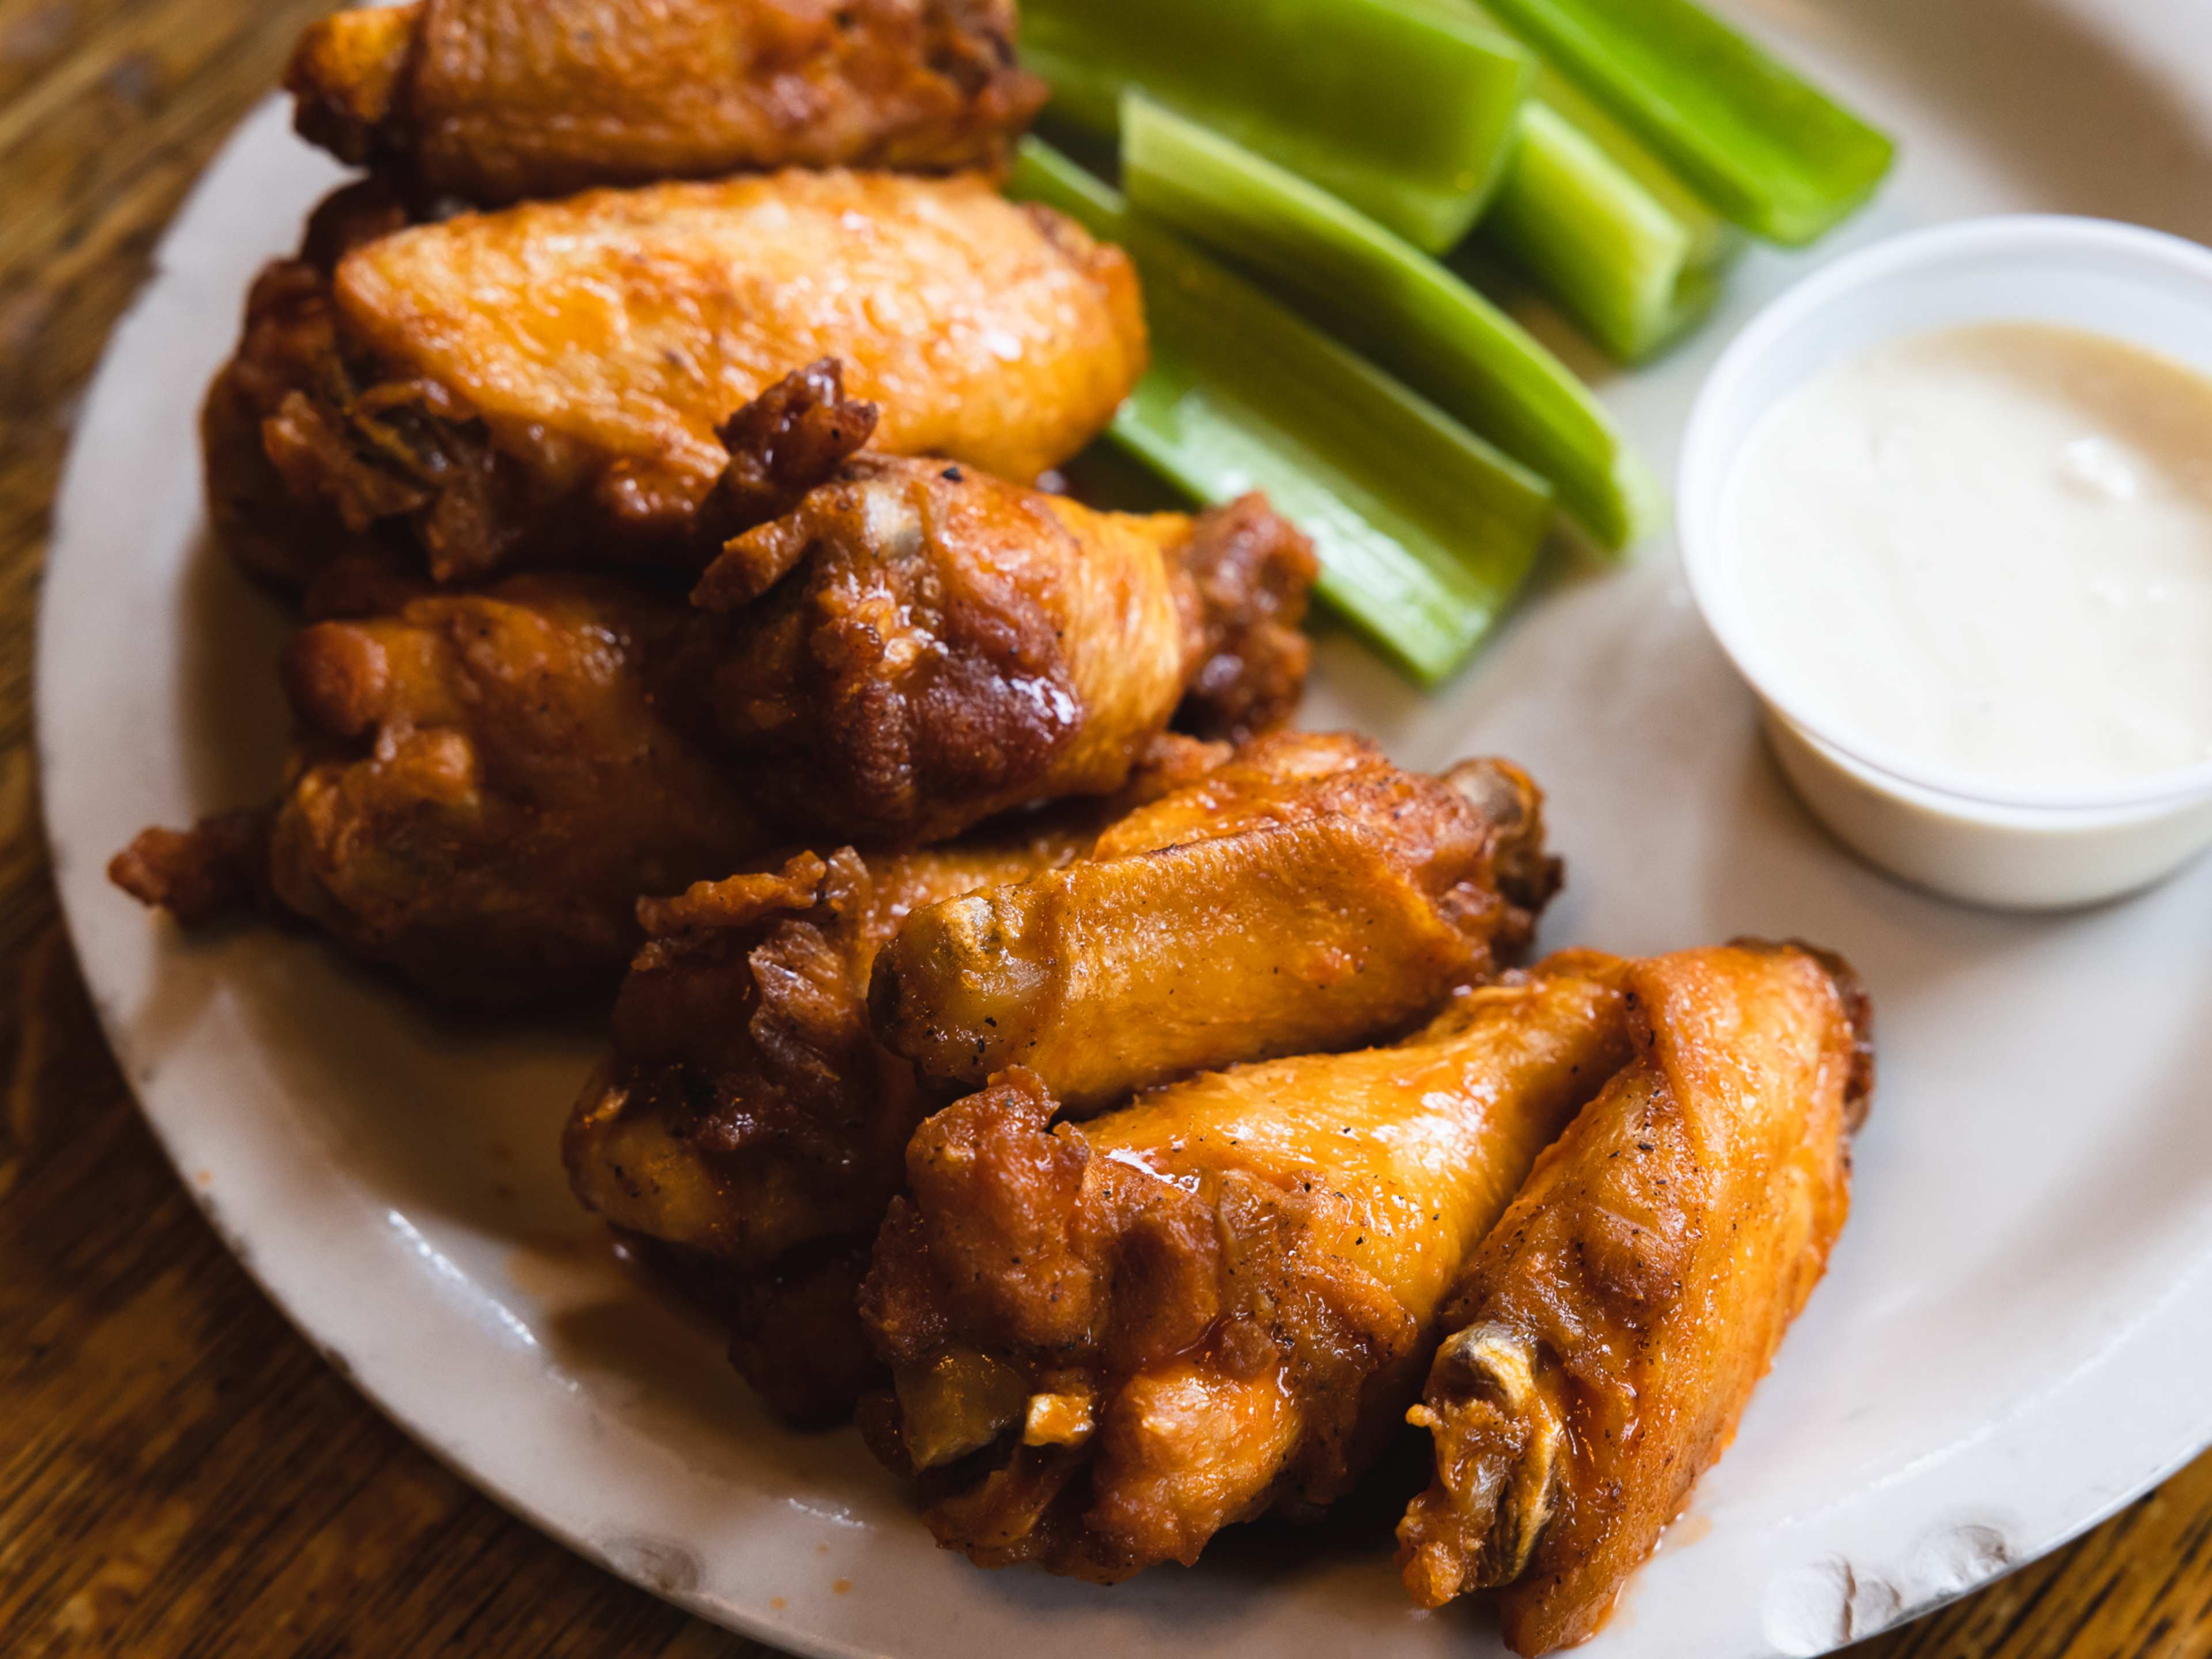 A pile of hot wings with a side of ranch.